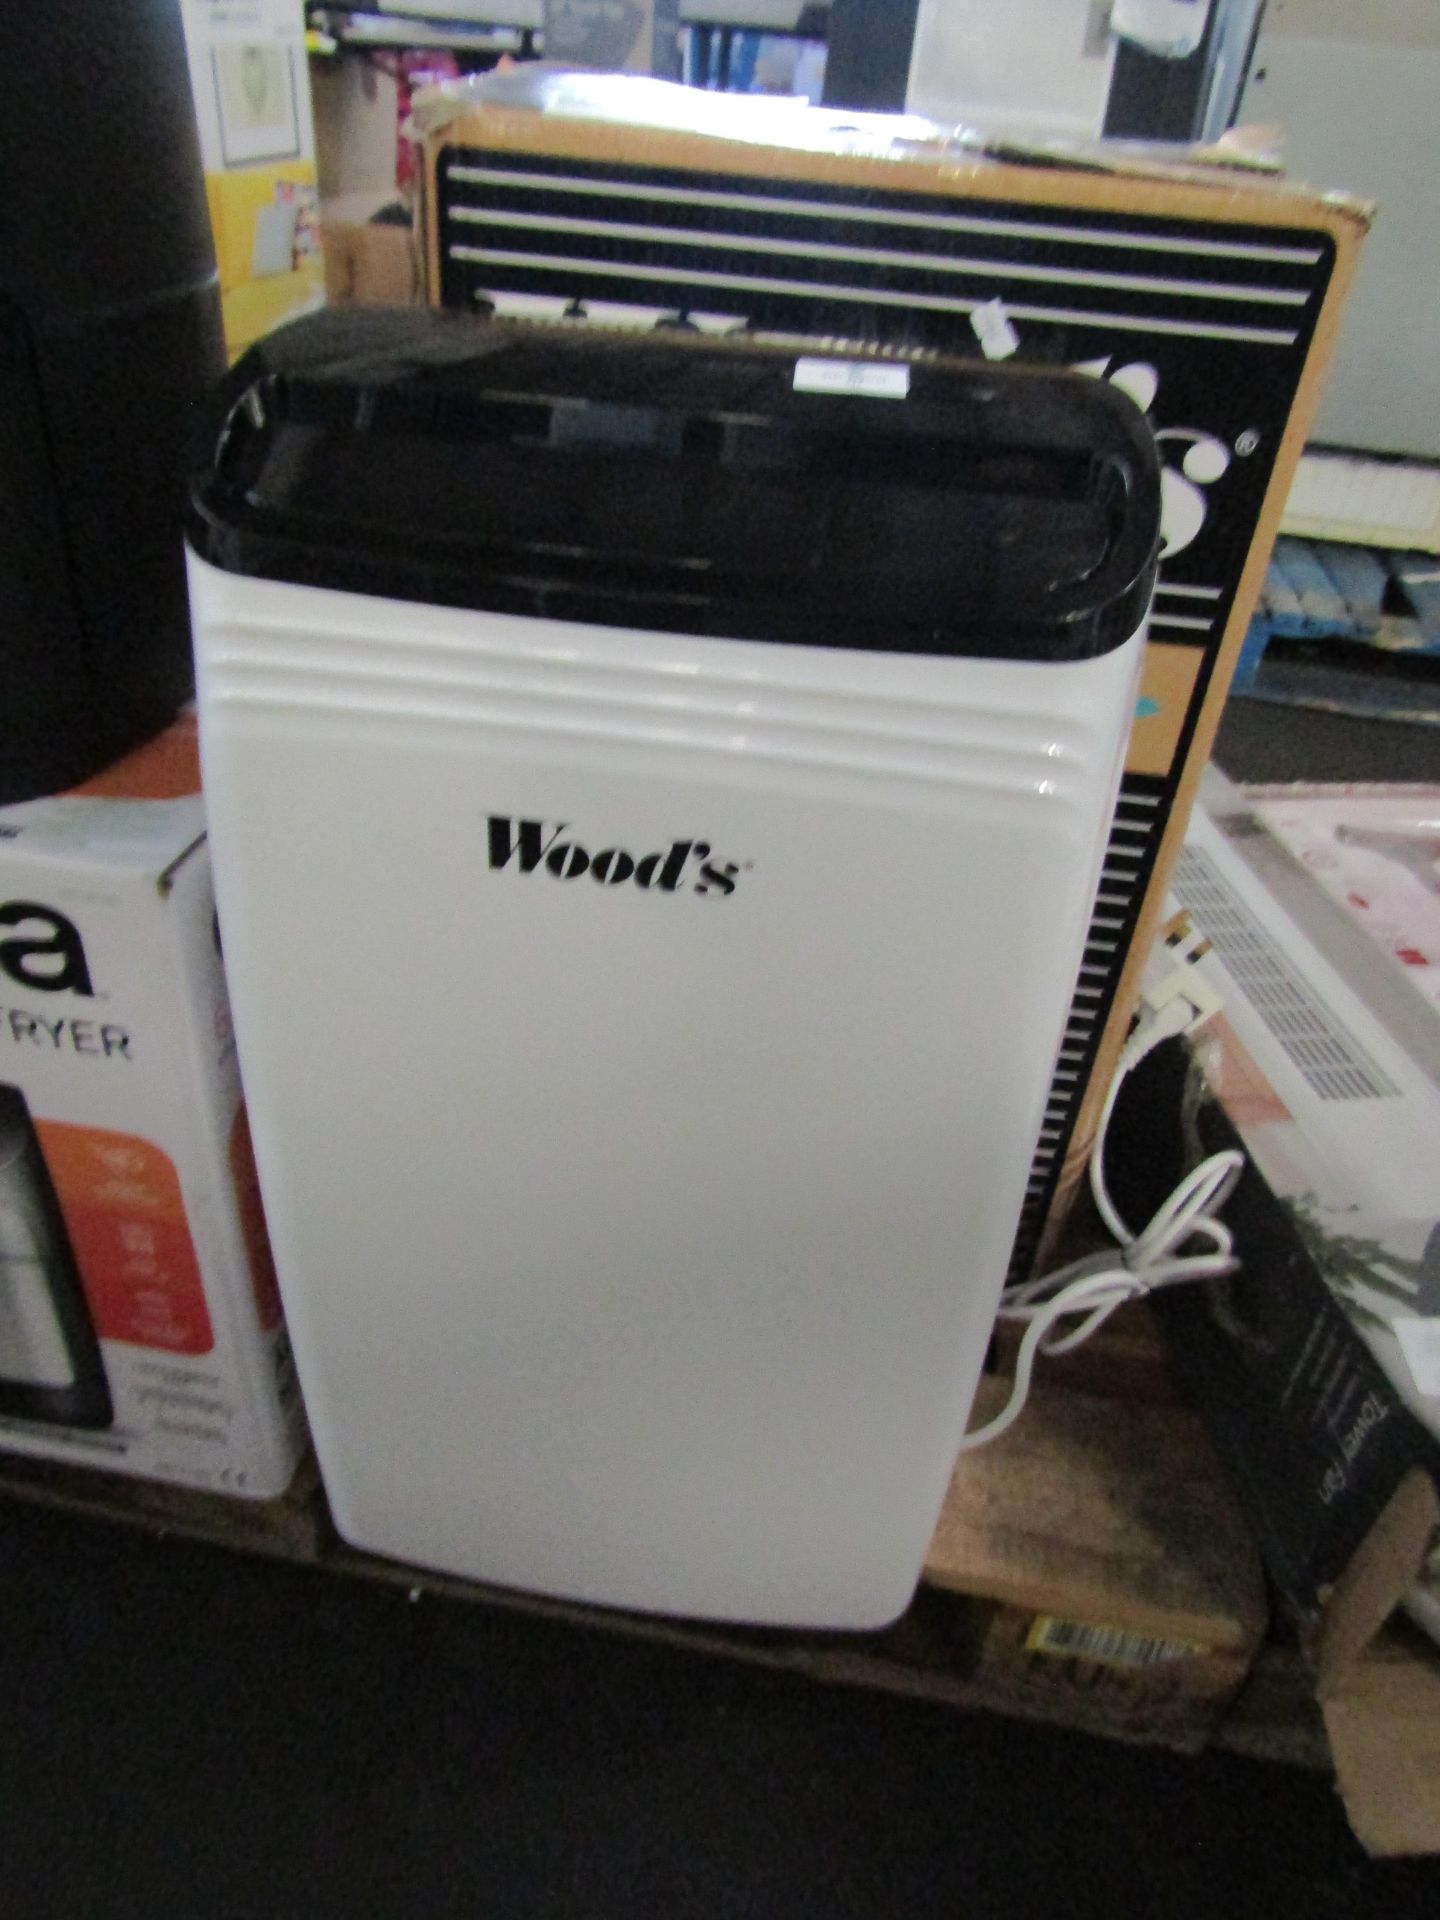 Woods MDK26 dehumidifier, comes with original box, the items powers up and appears to work but we